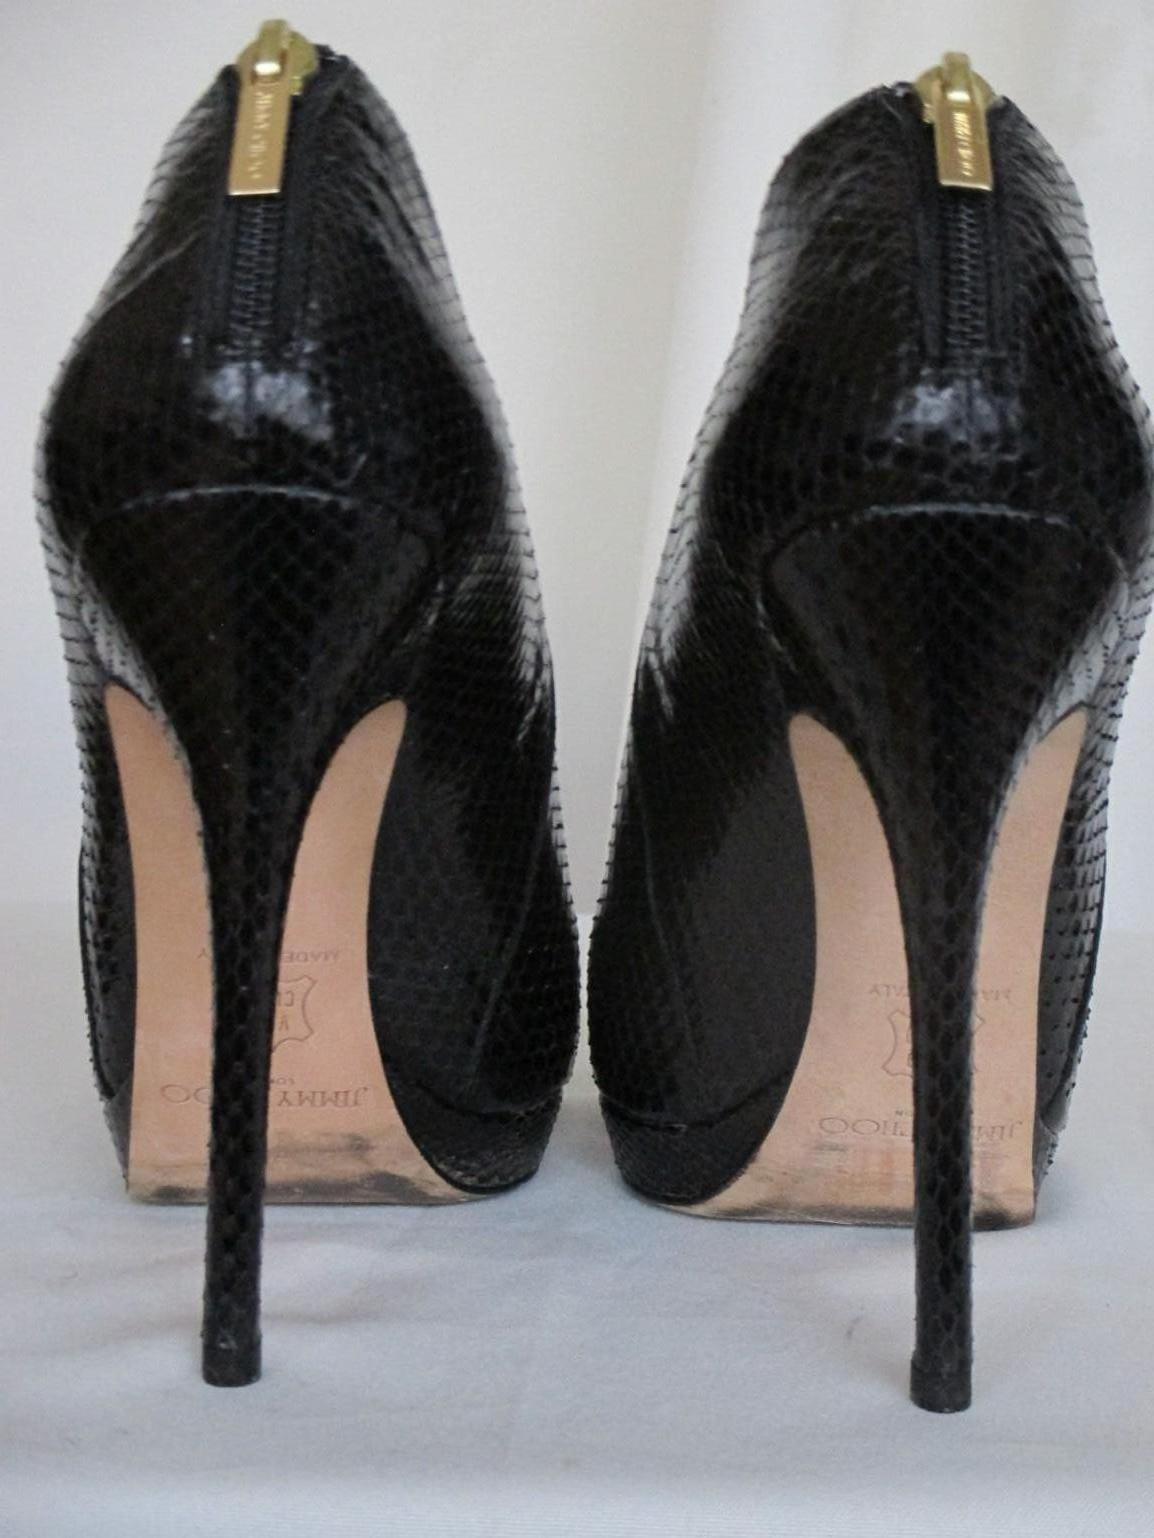 Black snakeskin leather platform boots with pointed toe. 
Back gold color zipper closure with nude leather interior. 
Size EU 40 / US 8/ UK 7.5  the heel is aprox. 13 cm high.
Minor signs of wear at the bottom, rarely worn.
No dustbag 

Please note